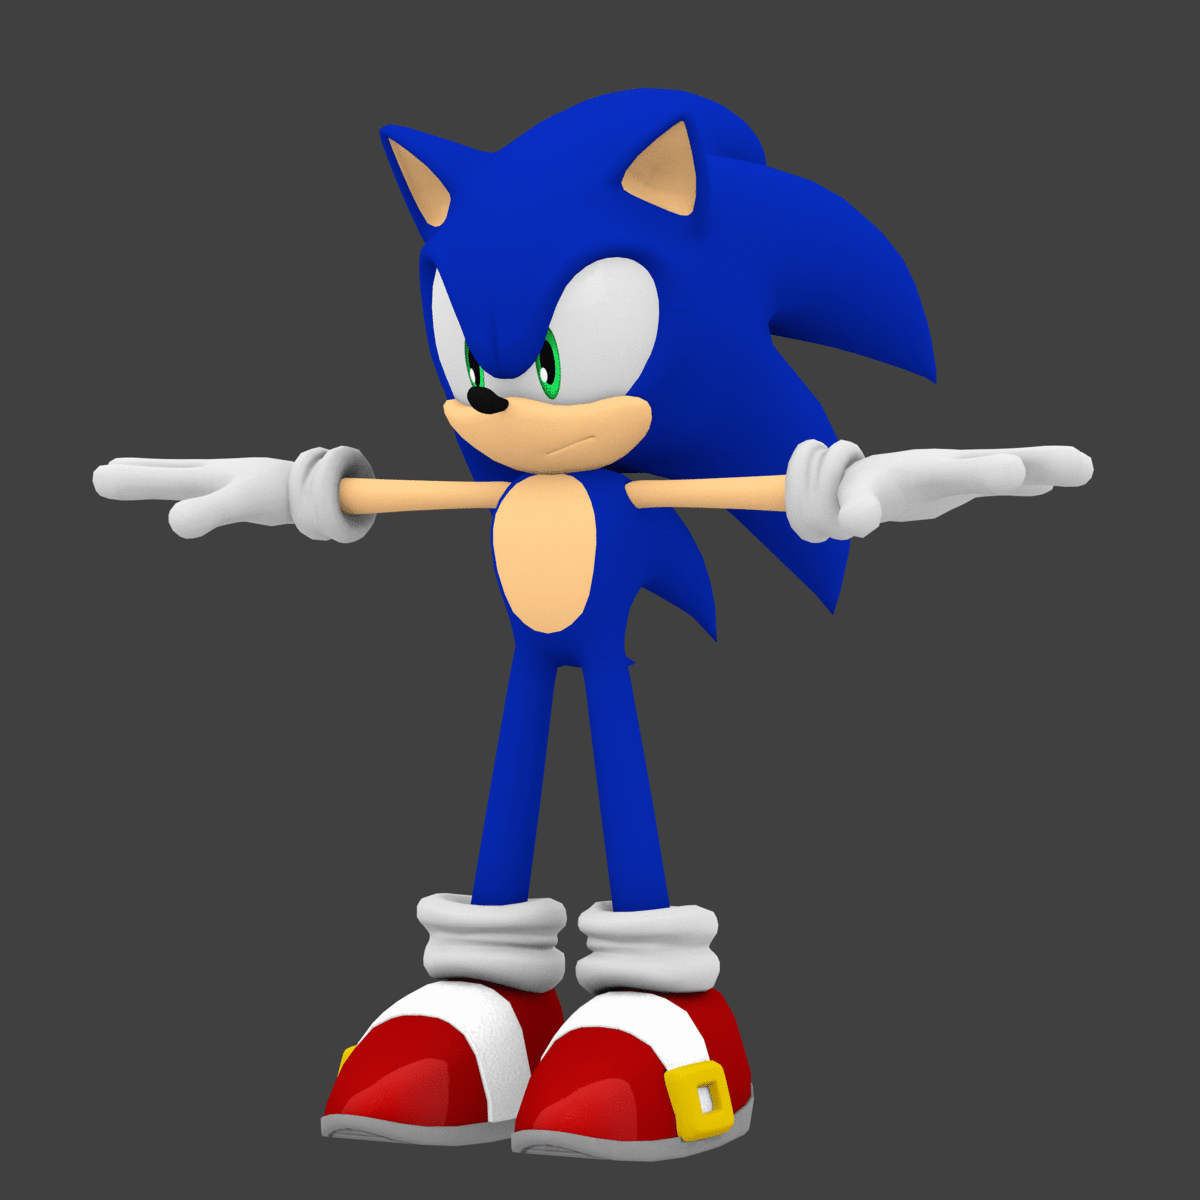 New Sonic textures + SOAP shoes by Detexki99 on DeviantArt